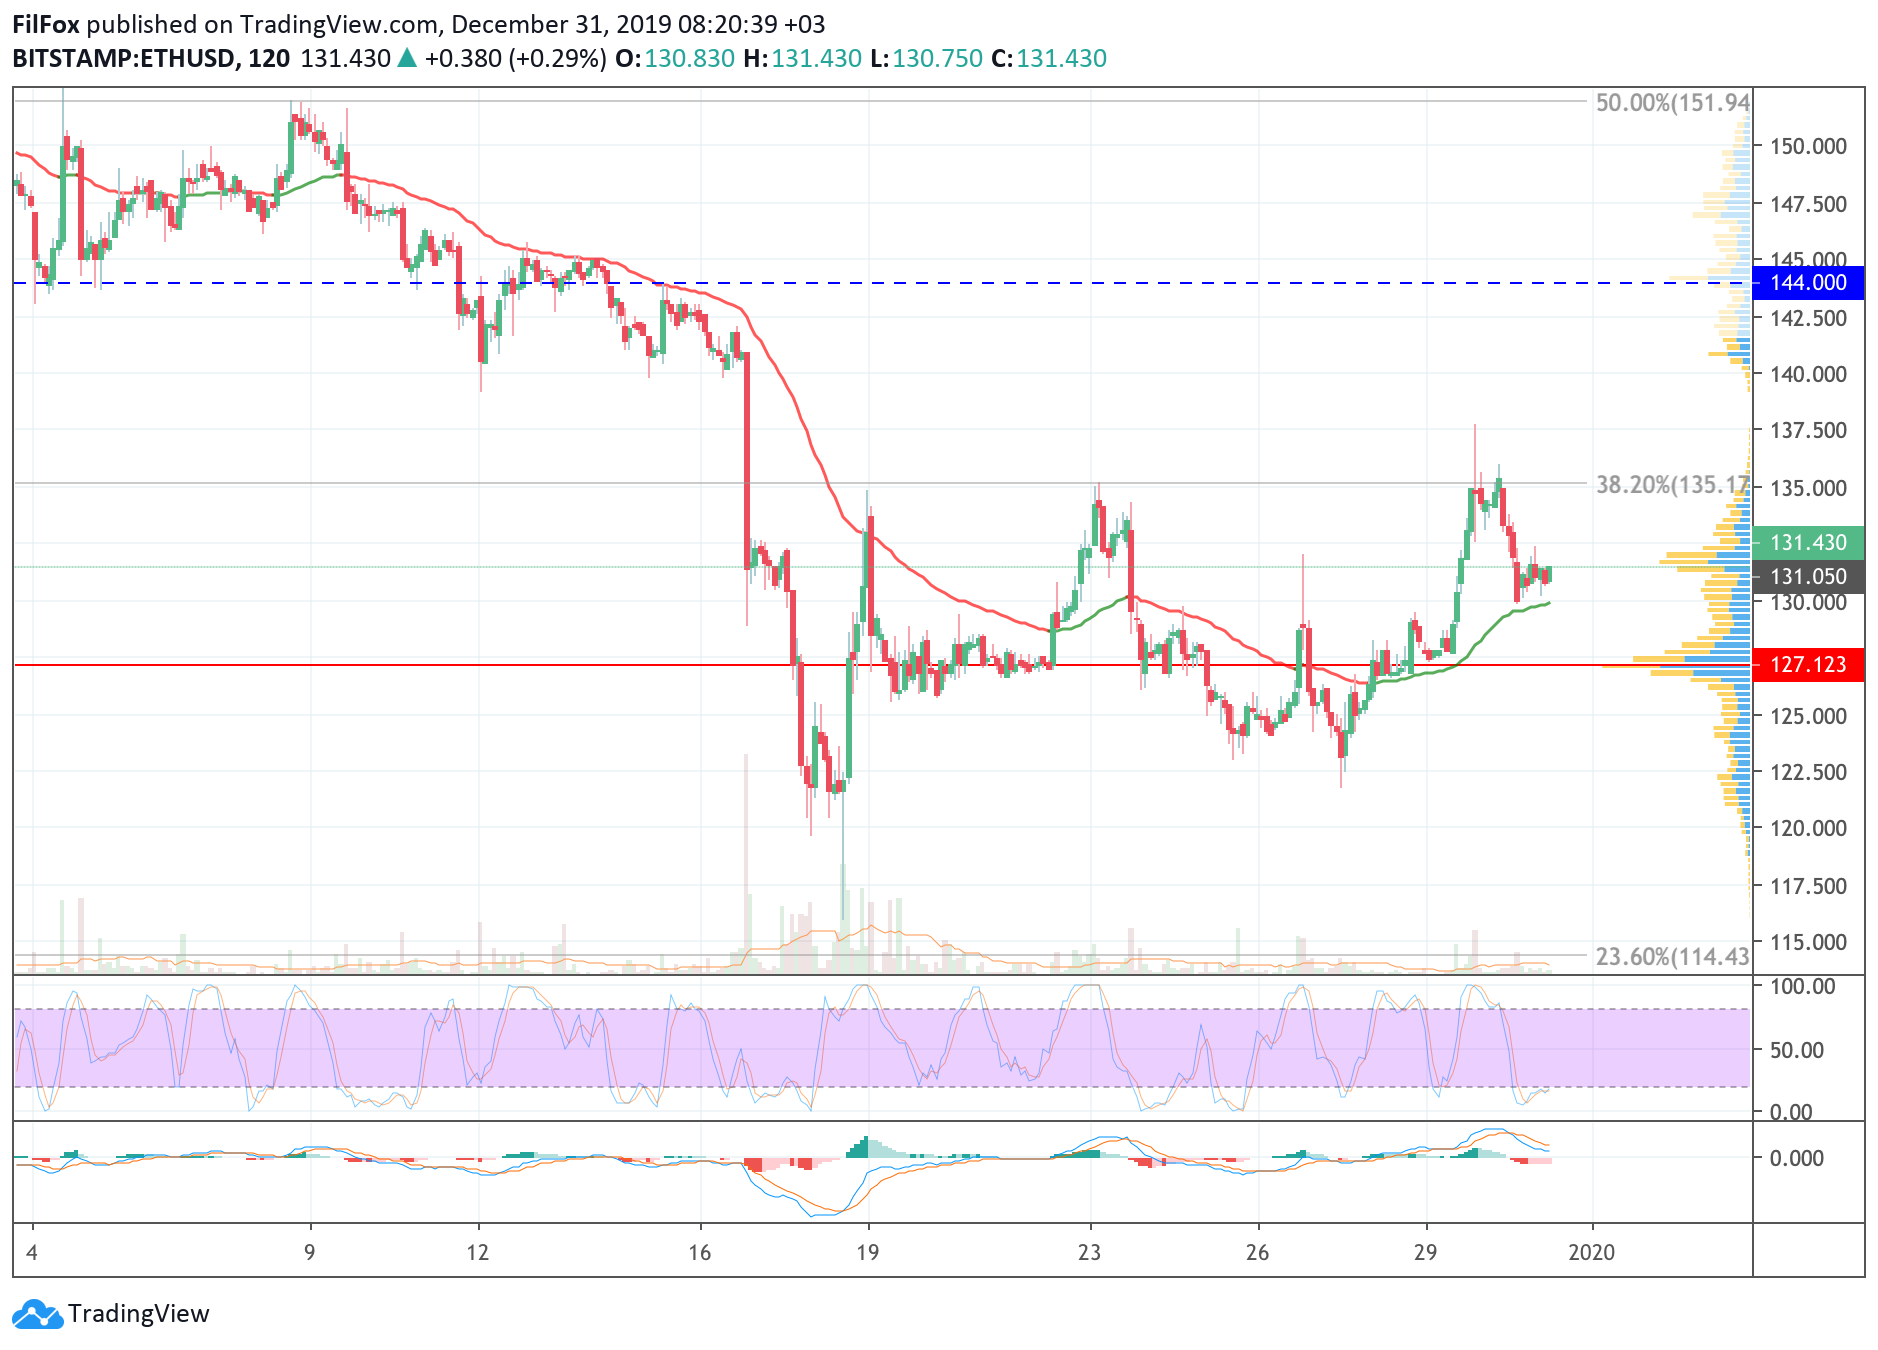 Analysis of cryptocurrency pairs BTC / USD, ETH / USD and XRP / USD as of December 31, 2019